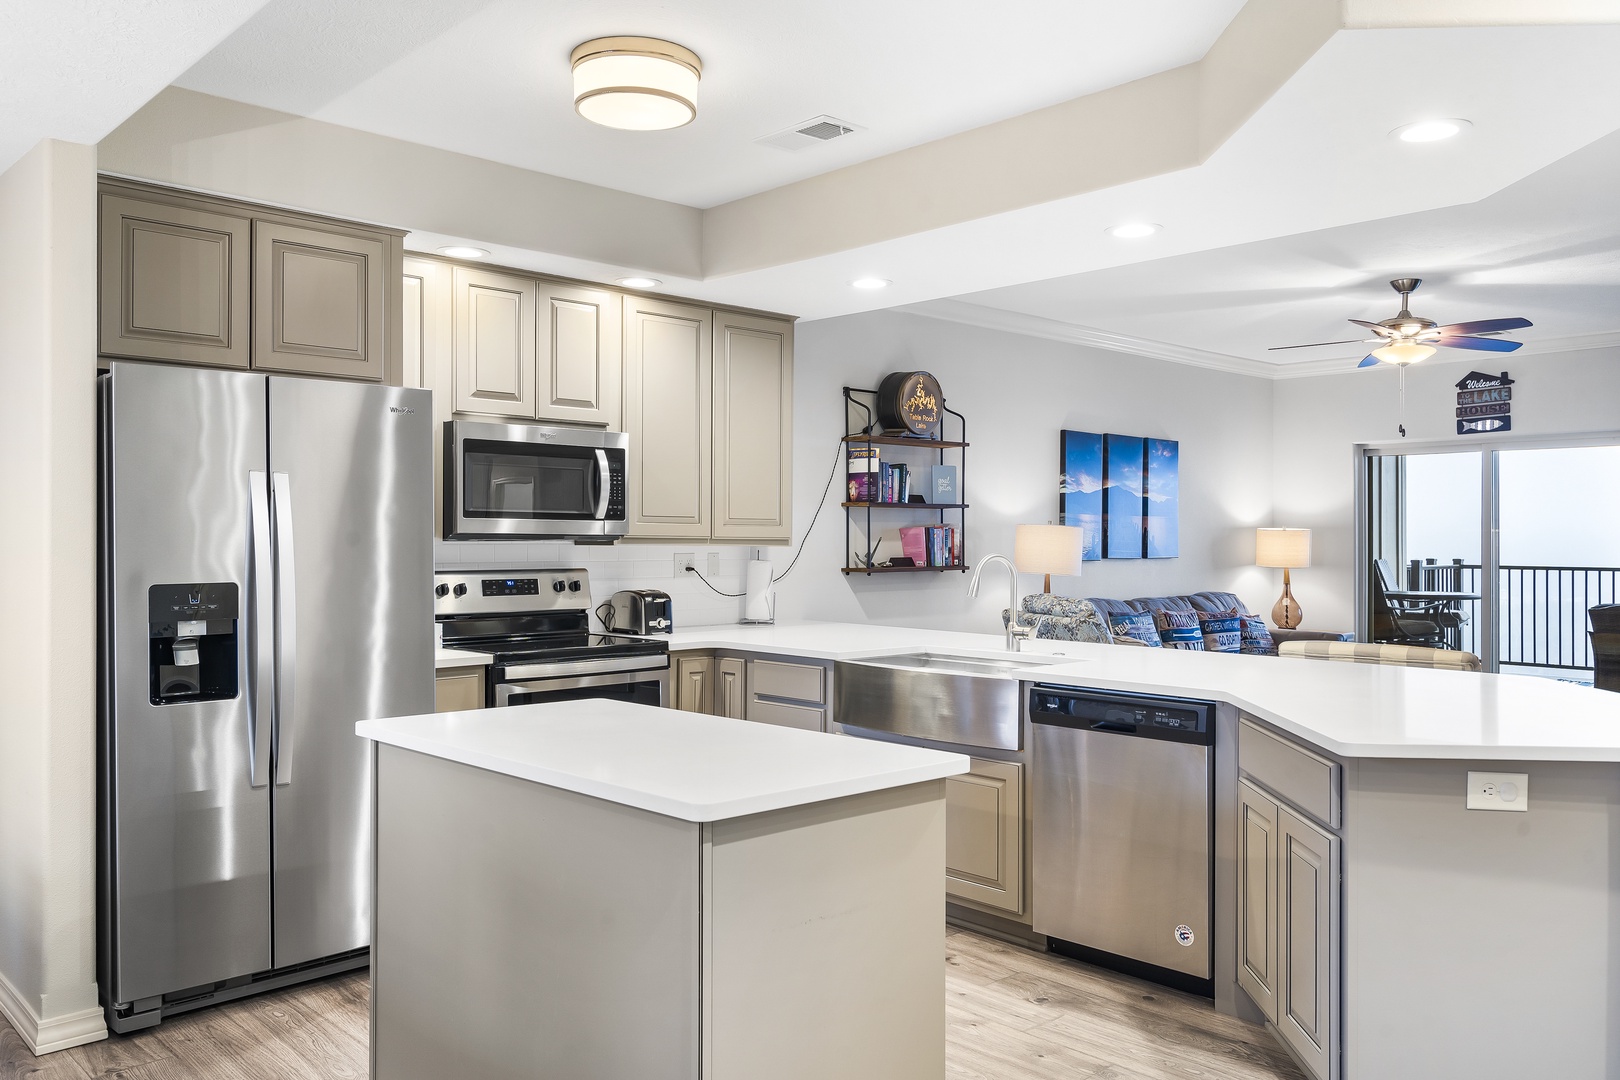 The airy kitchen features beautiful views, ample space, & all the comforts of home